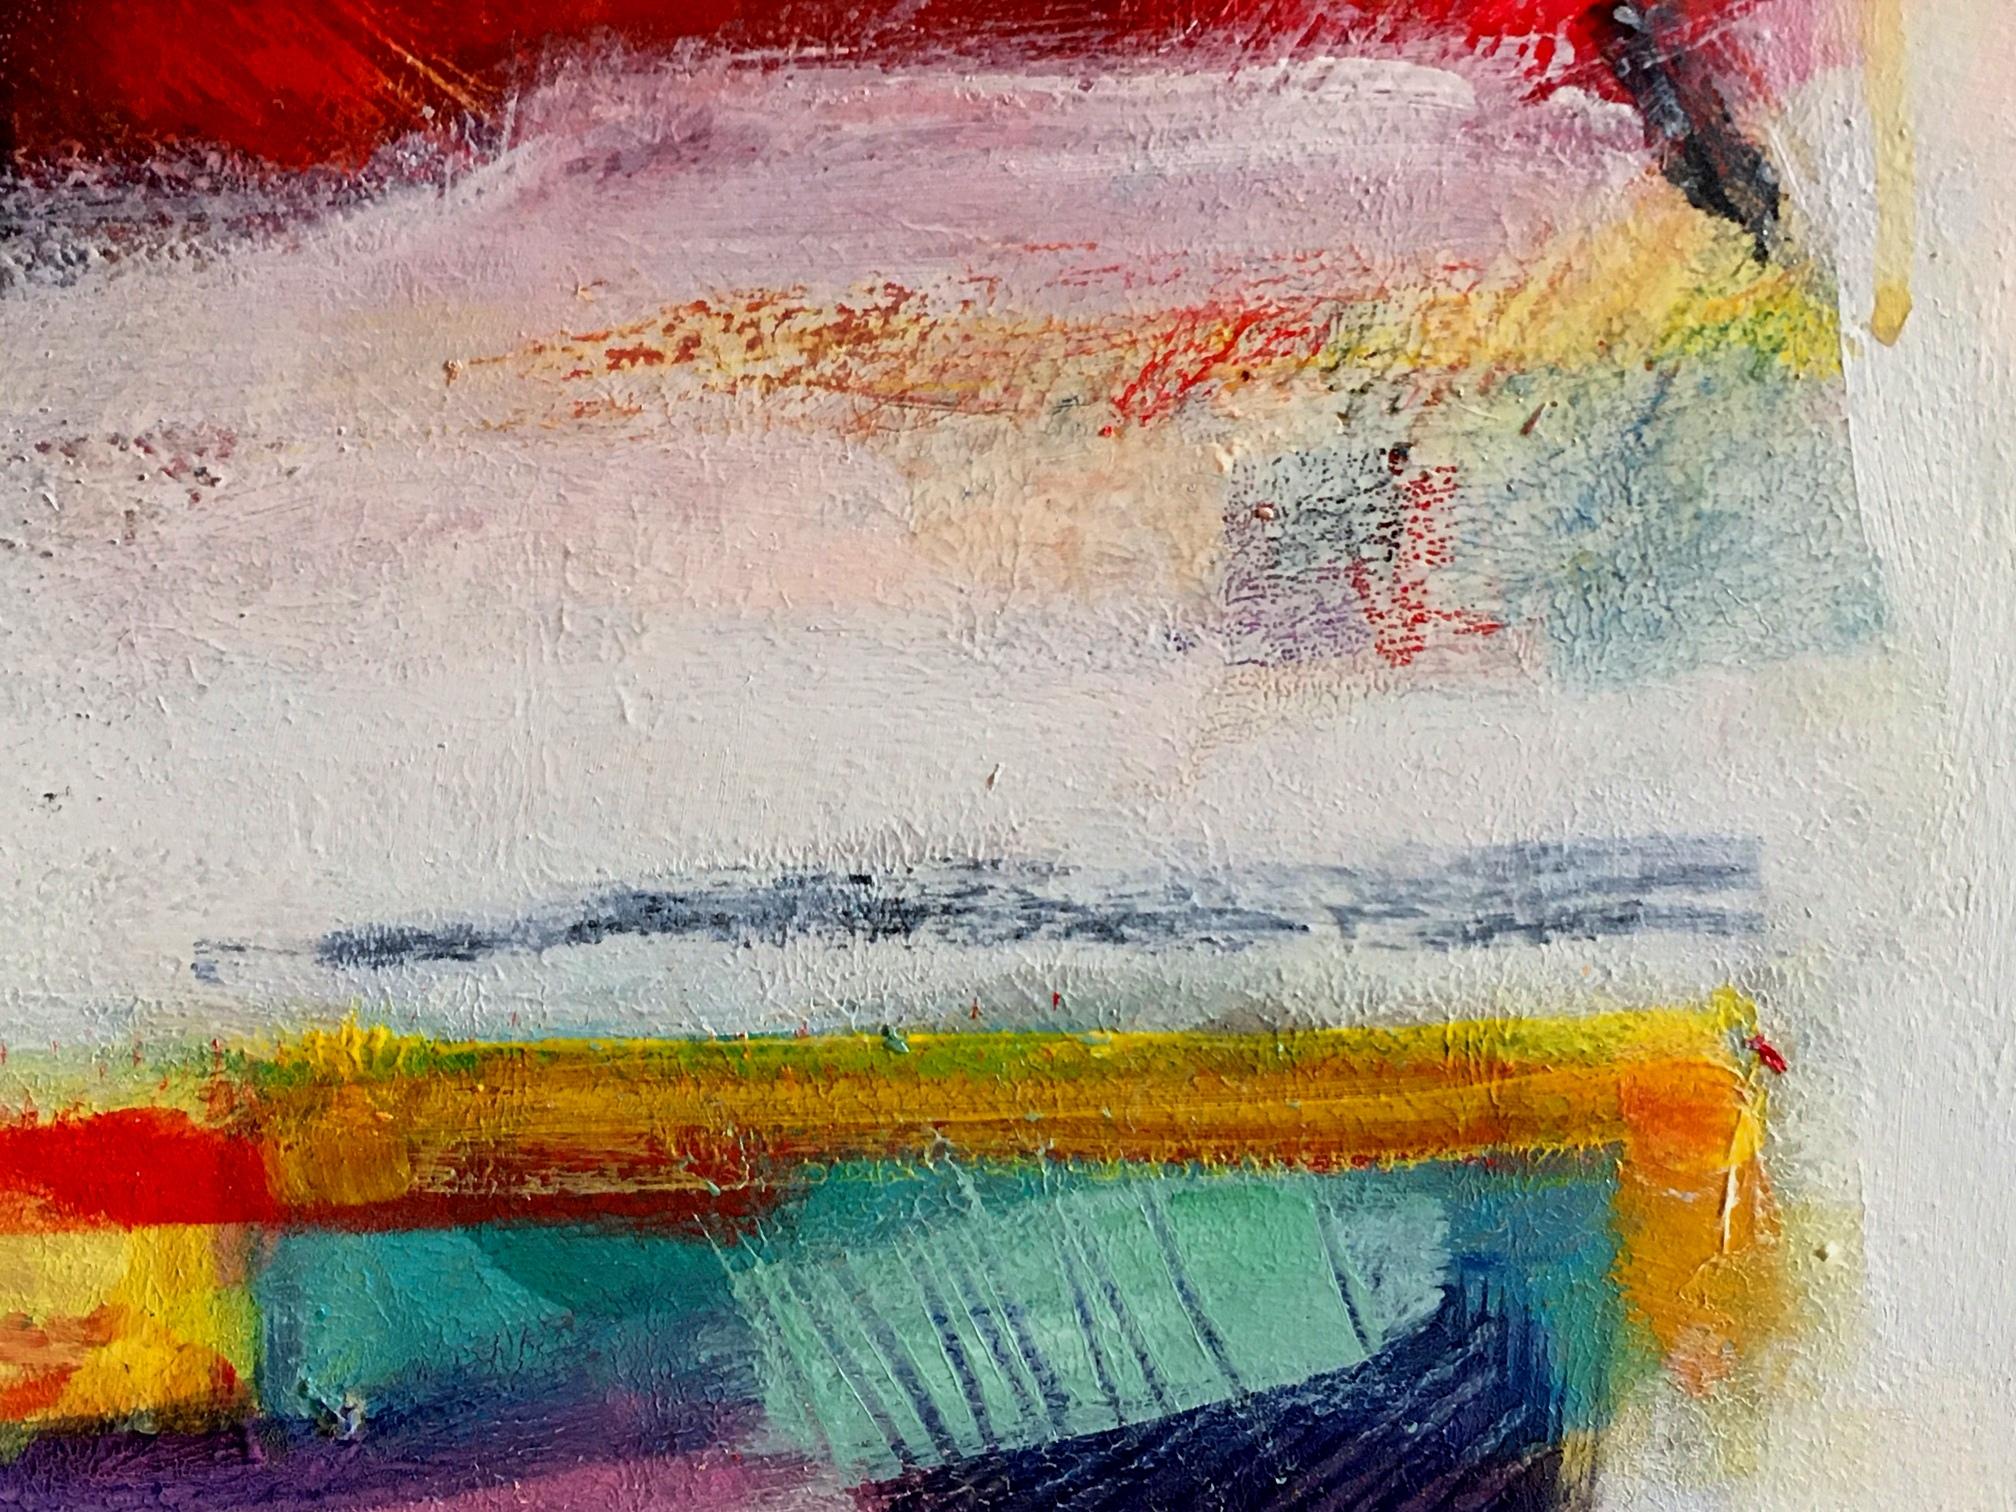 Kerrera #2 by Jon Rowland, Landscape painting, abstract painting, original art For Sale 3